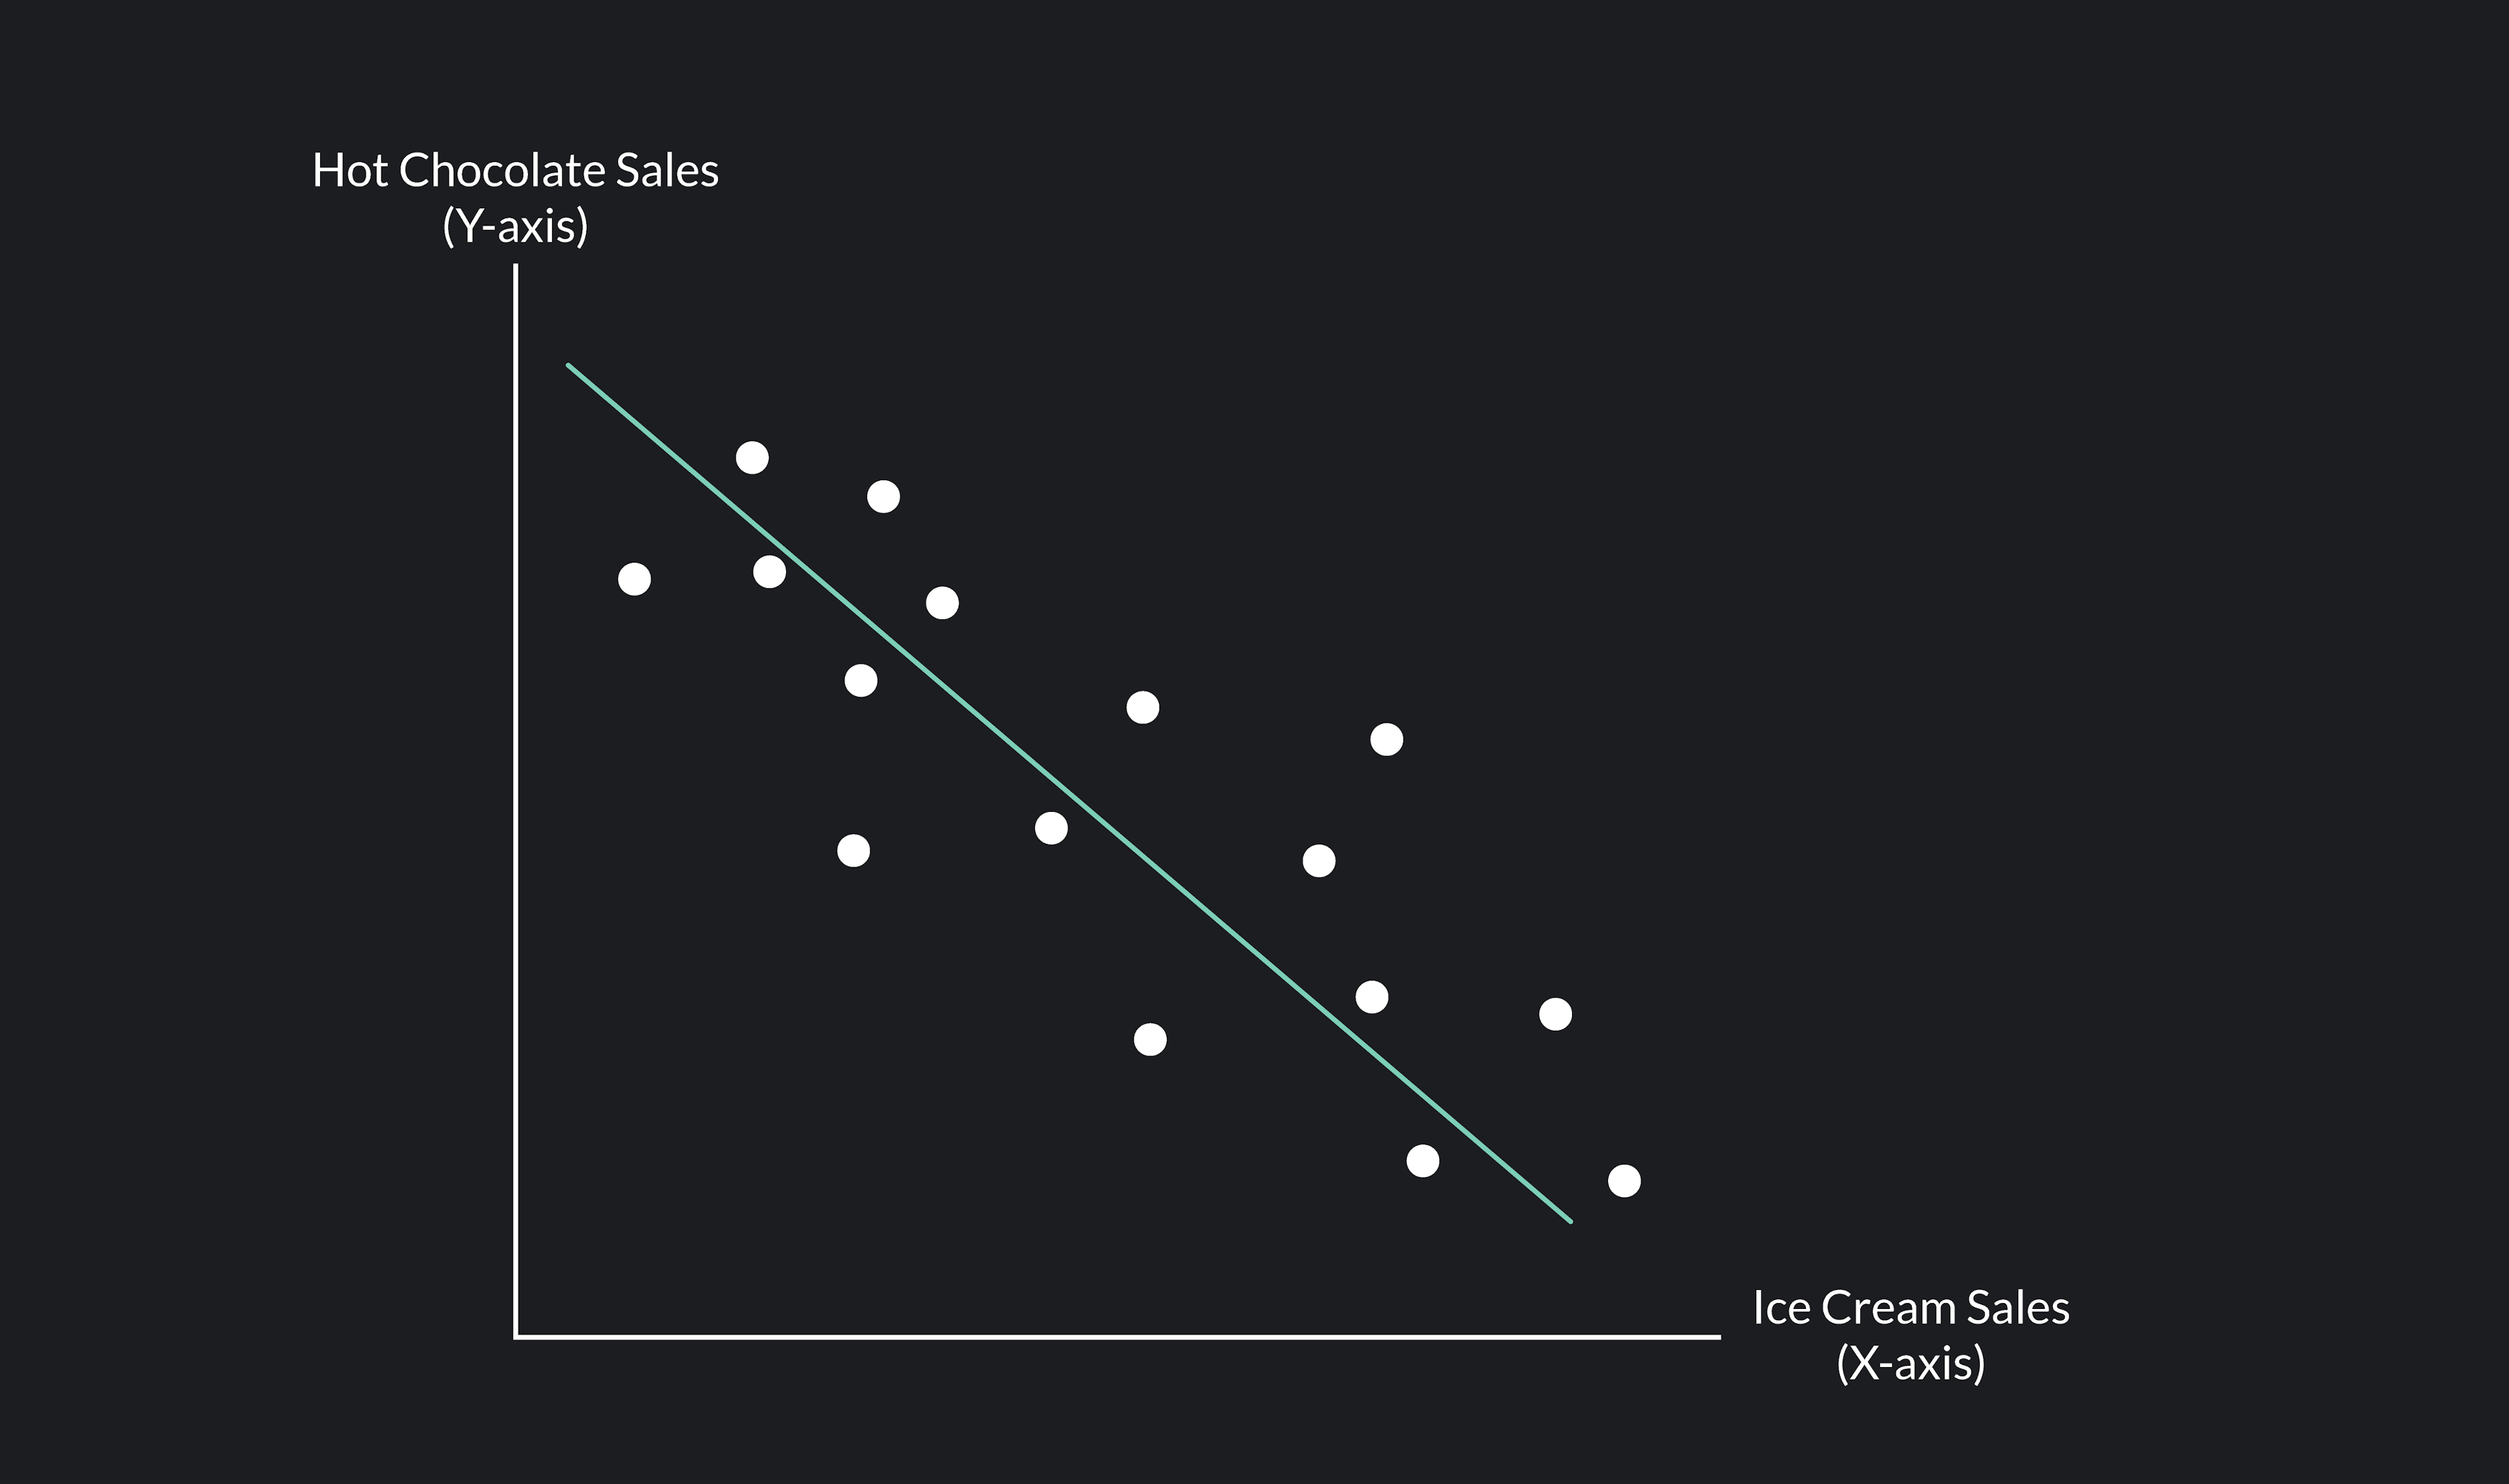 Graph showing Negative Correlation of hot chocolate sales on y-axis to ice cream sales on x-axis